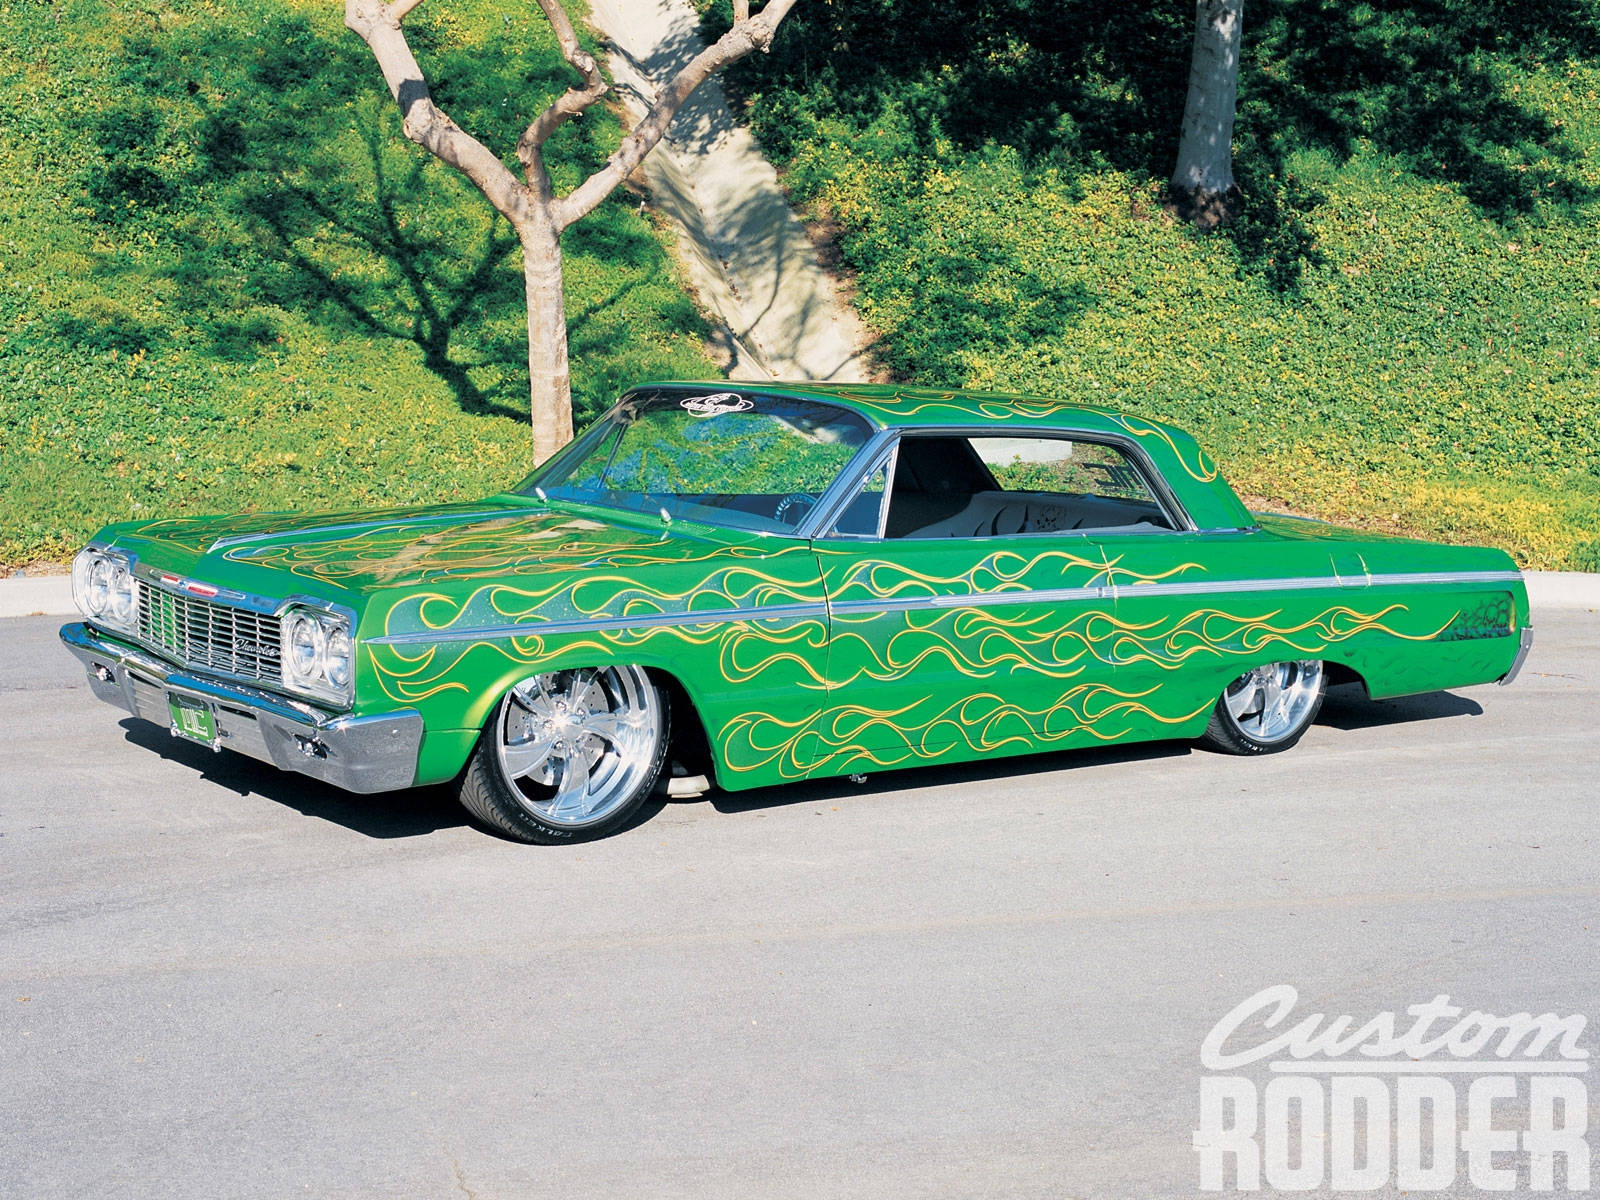 Lowrider Green Impala With Fiery Decals Wallpaper